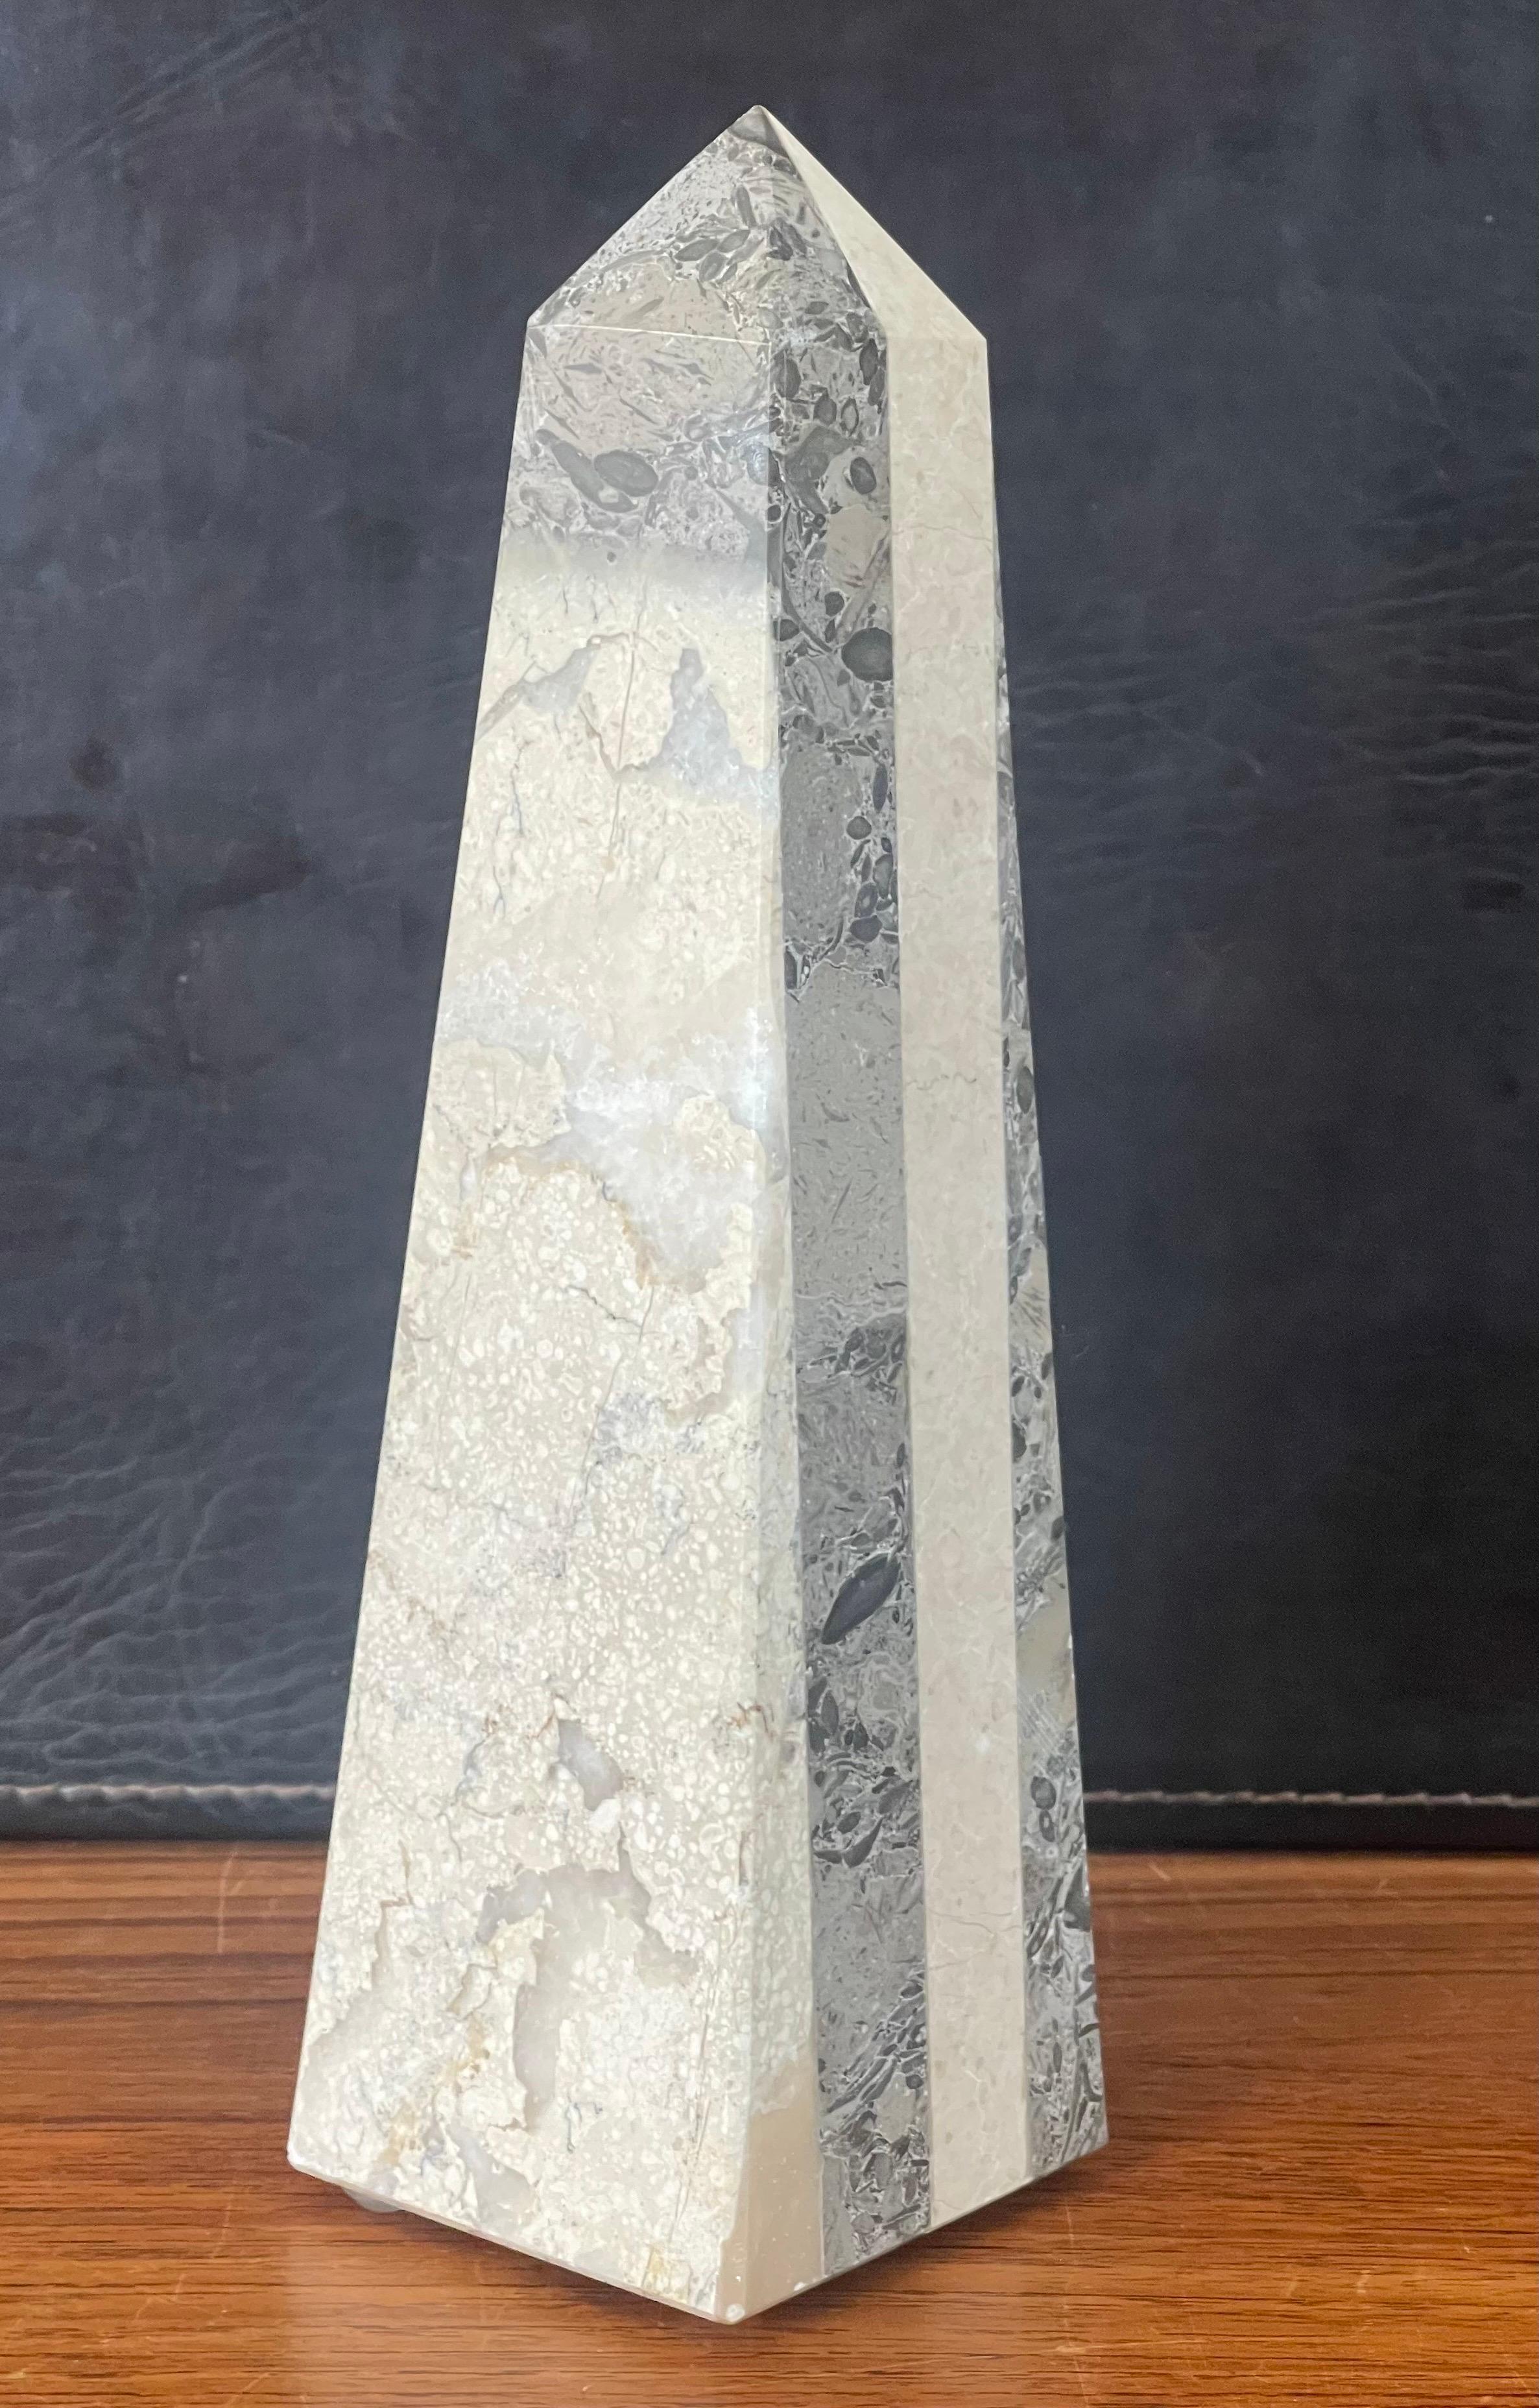 Beautiful solid mixed marble decorative obelisk, circa 1970s. The piece is in very good vintage condition with no chips or cracks and is nicely polished. The piece is 2.875